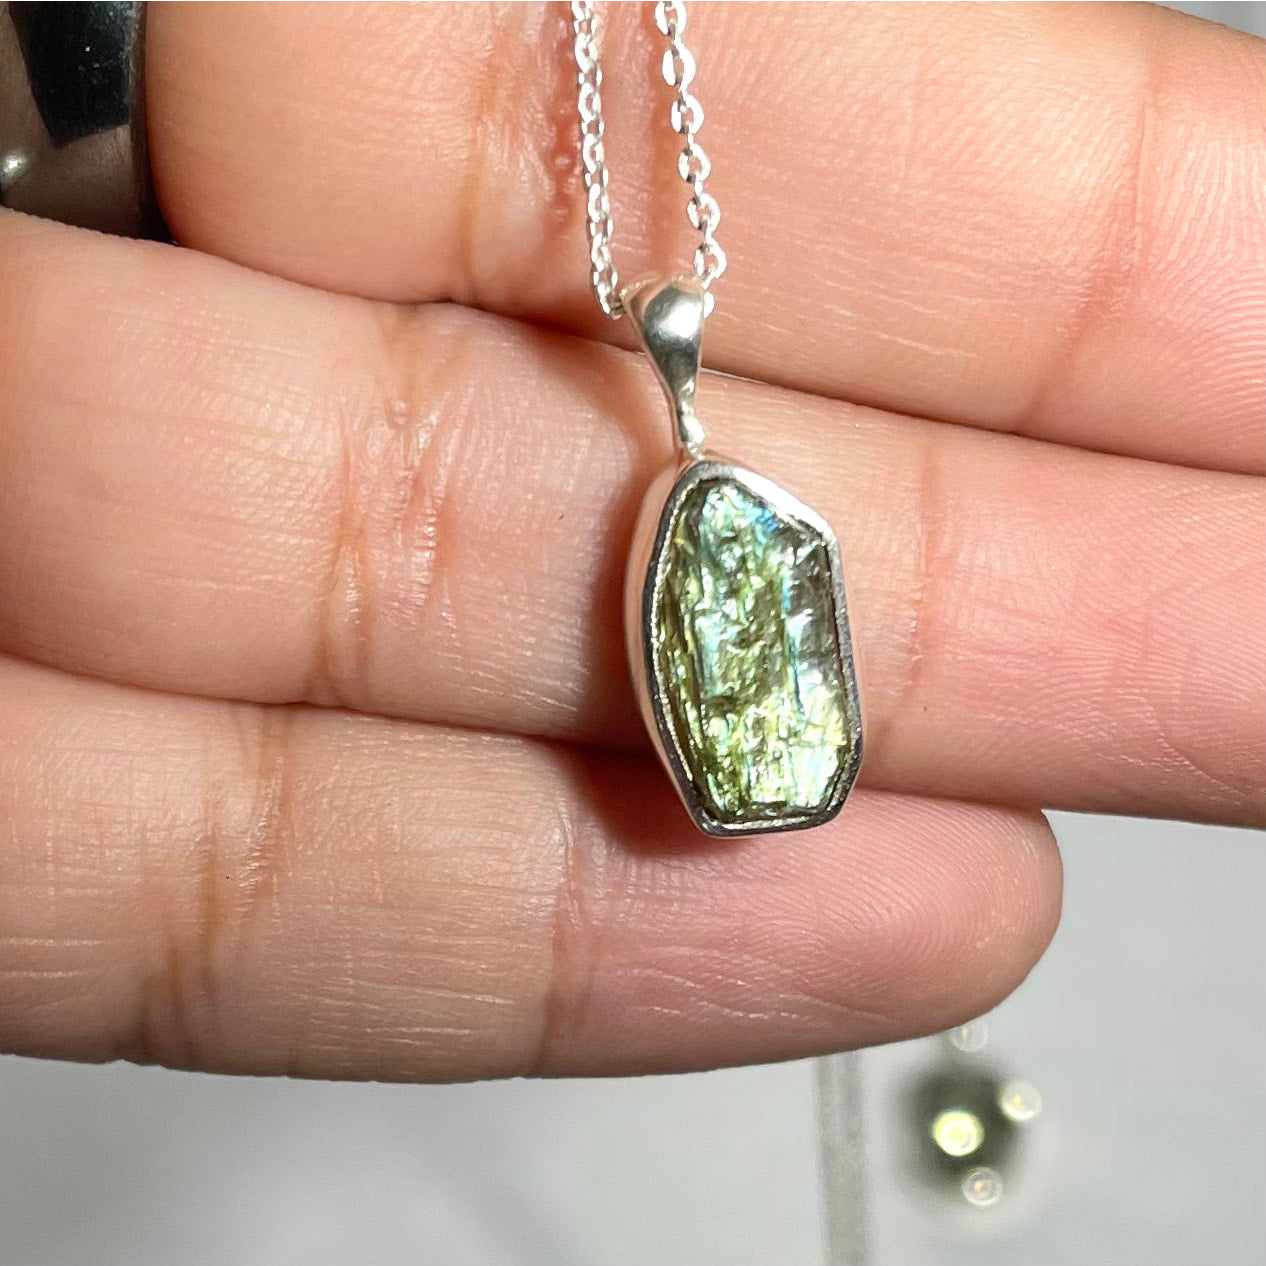 A person holding a green gems pendant for positive energy, Raw Sterling Silver Crystal Pendant